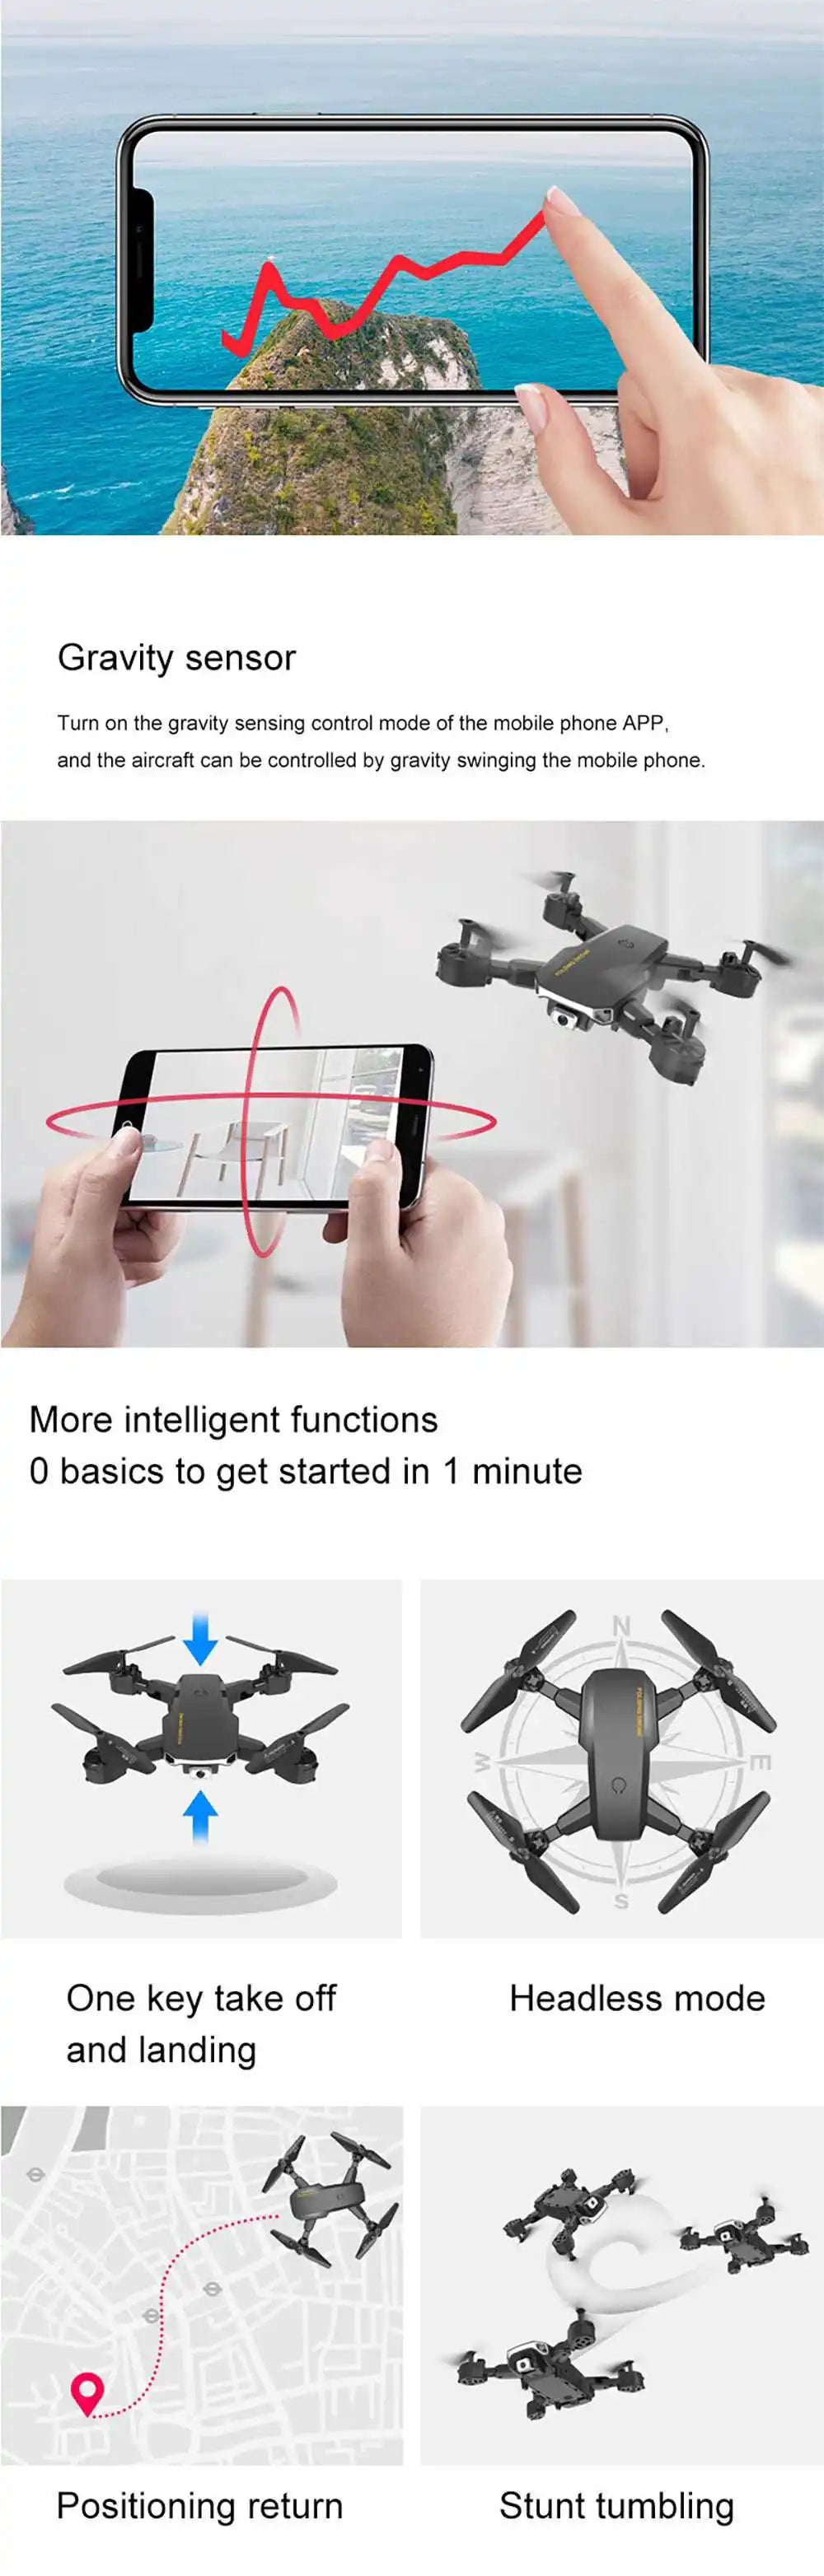 Eachine S60 Mini Drone, aircraft can be controlled by gravity swinging the mobile phone app .